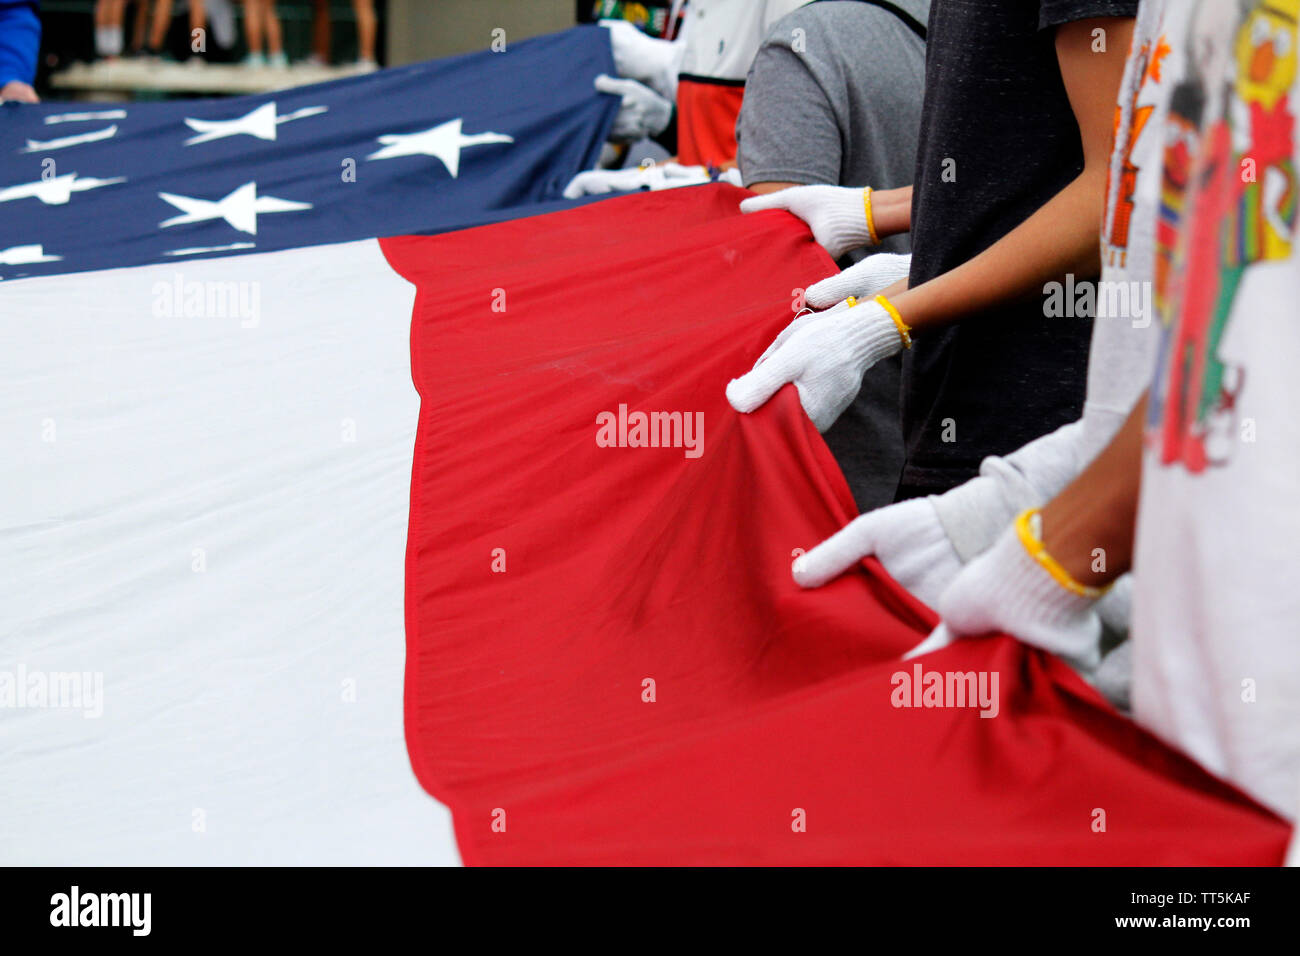 Philadelphia, PA, USA - June 14, 2019: Students work together to fold a giant American flag during Flag Day ceremonies at the National Constitution Center in Philadelphia, Pennsylvania. Credit: OOgImages/Alamy Live News Stock Photo